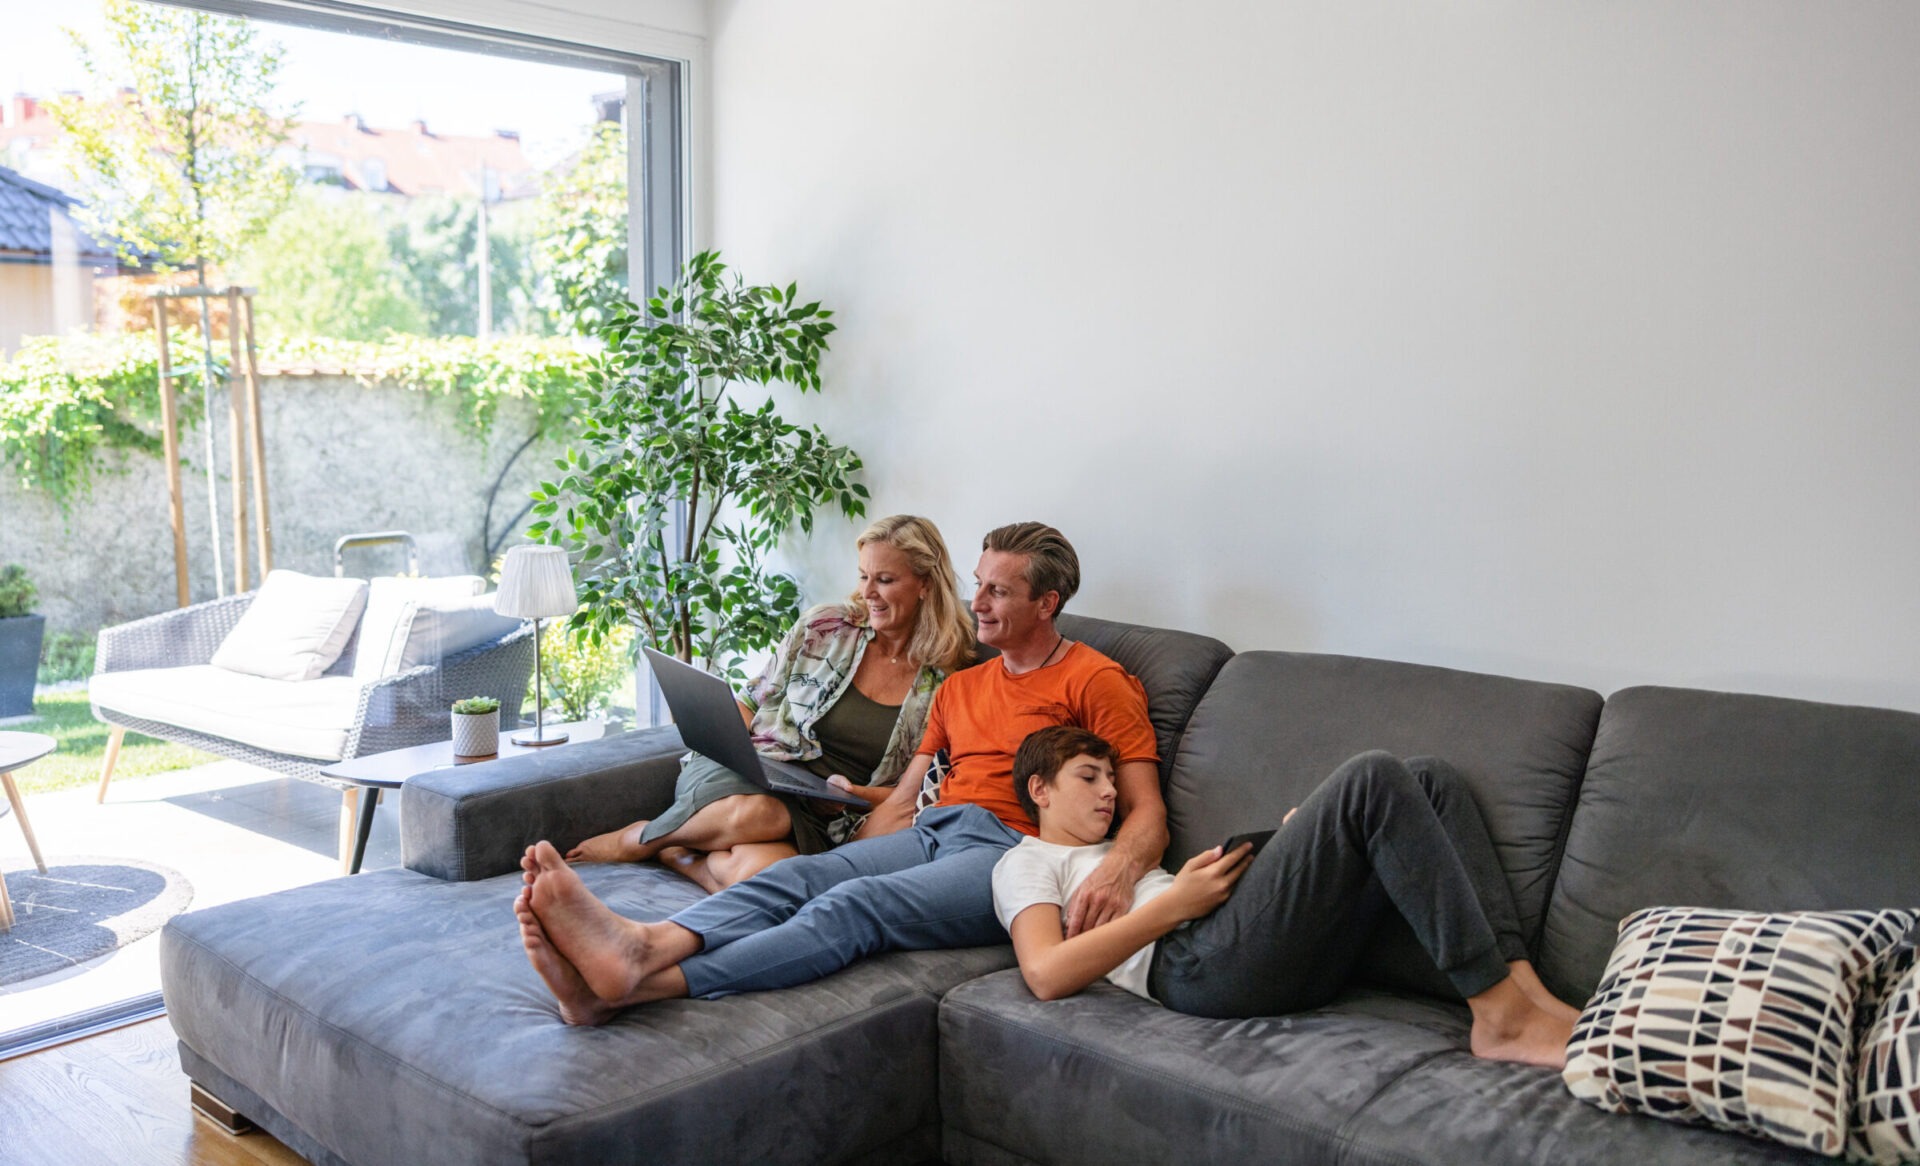 Two adults and a child are relaxing on a gray sofa in a bright living room, using a laptop and a smartphone, with garden view.